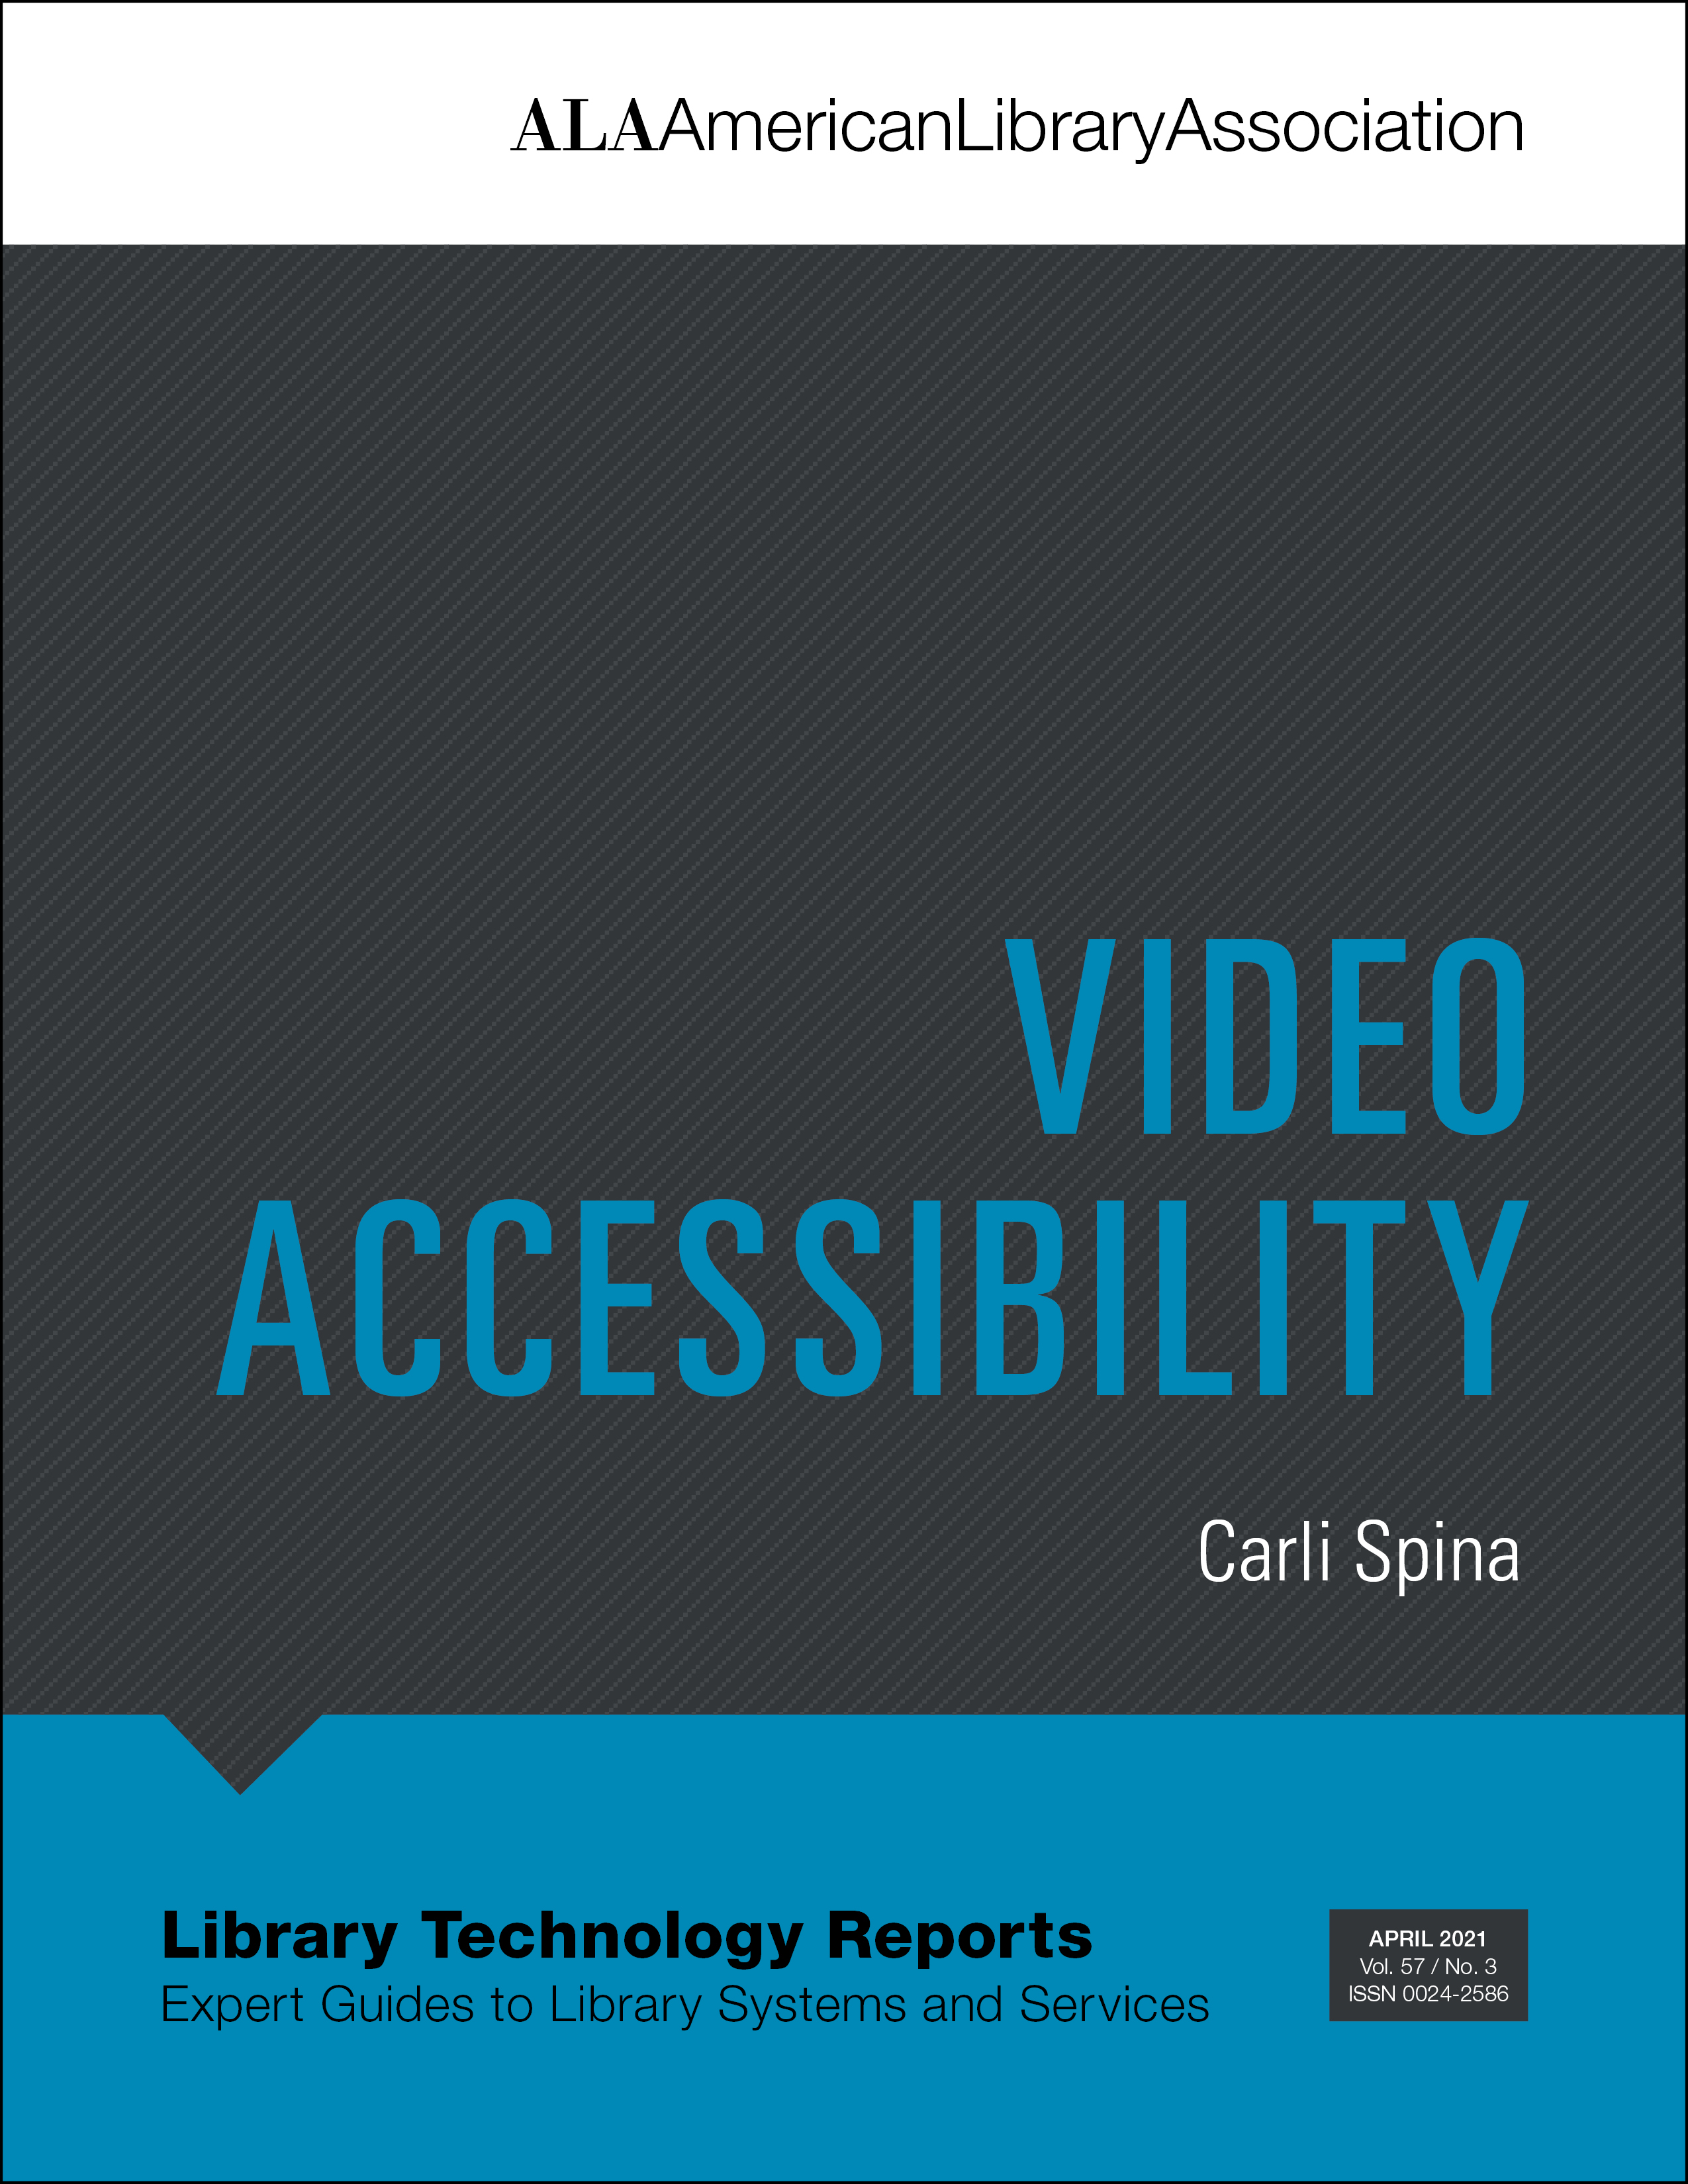 Video Accessibility